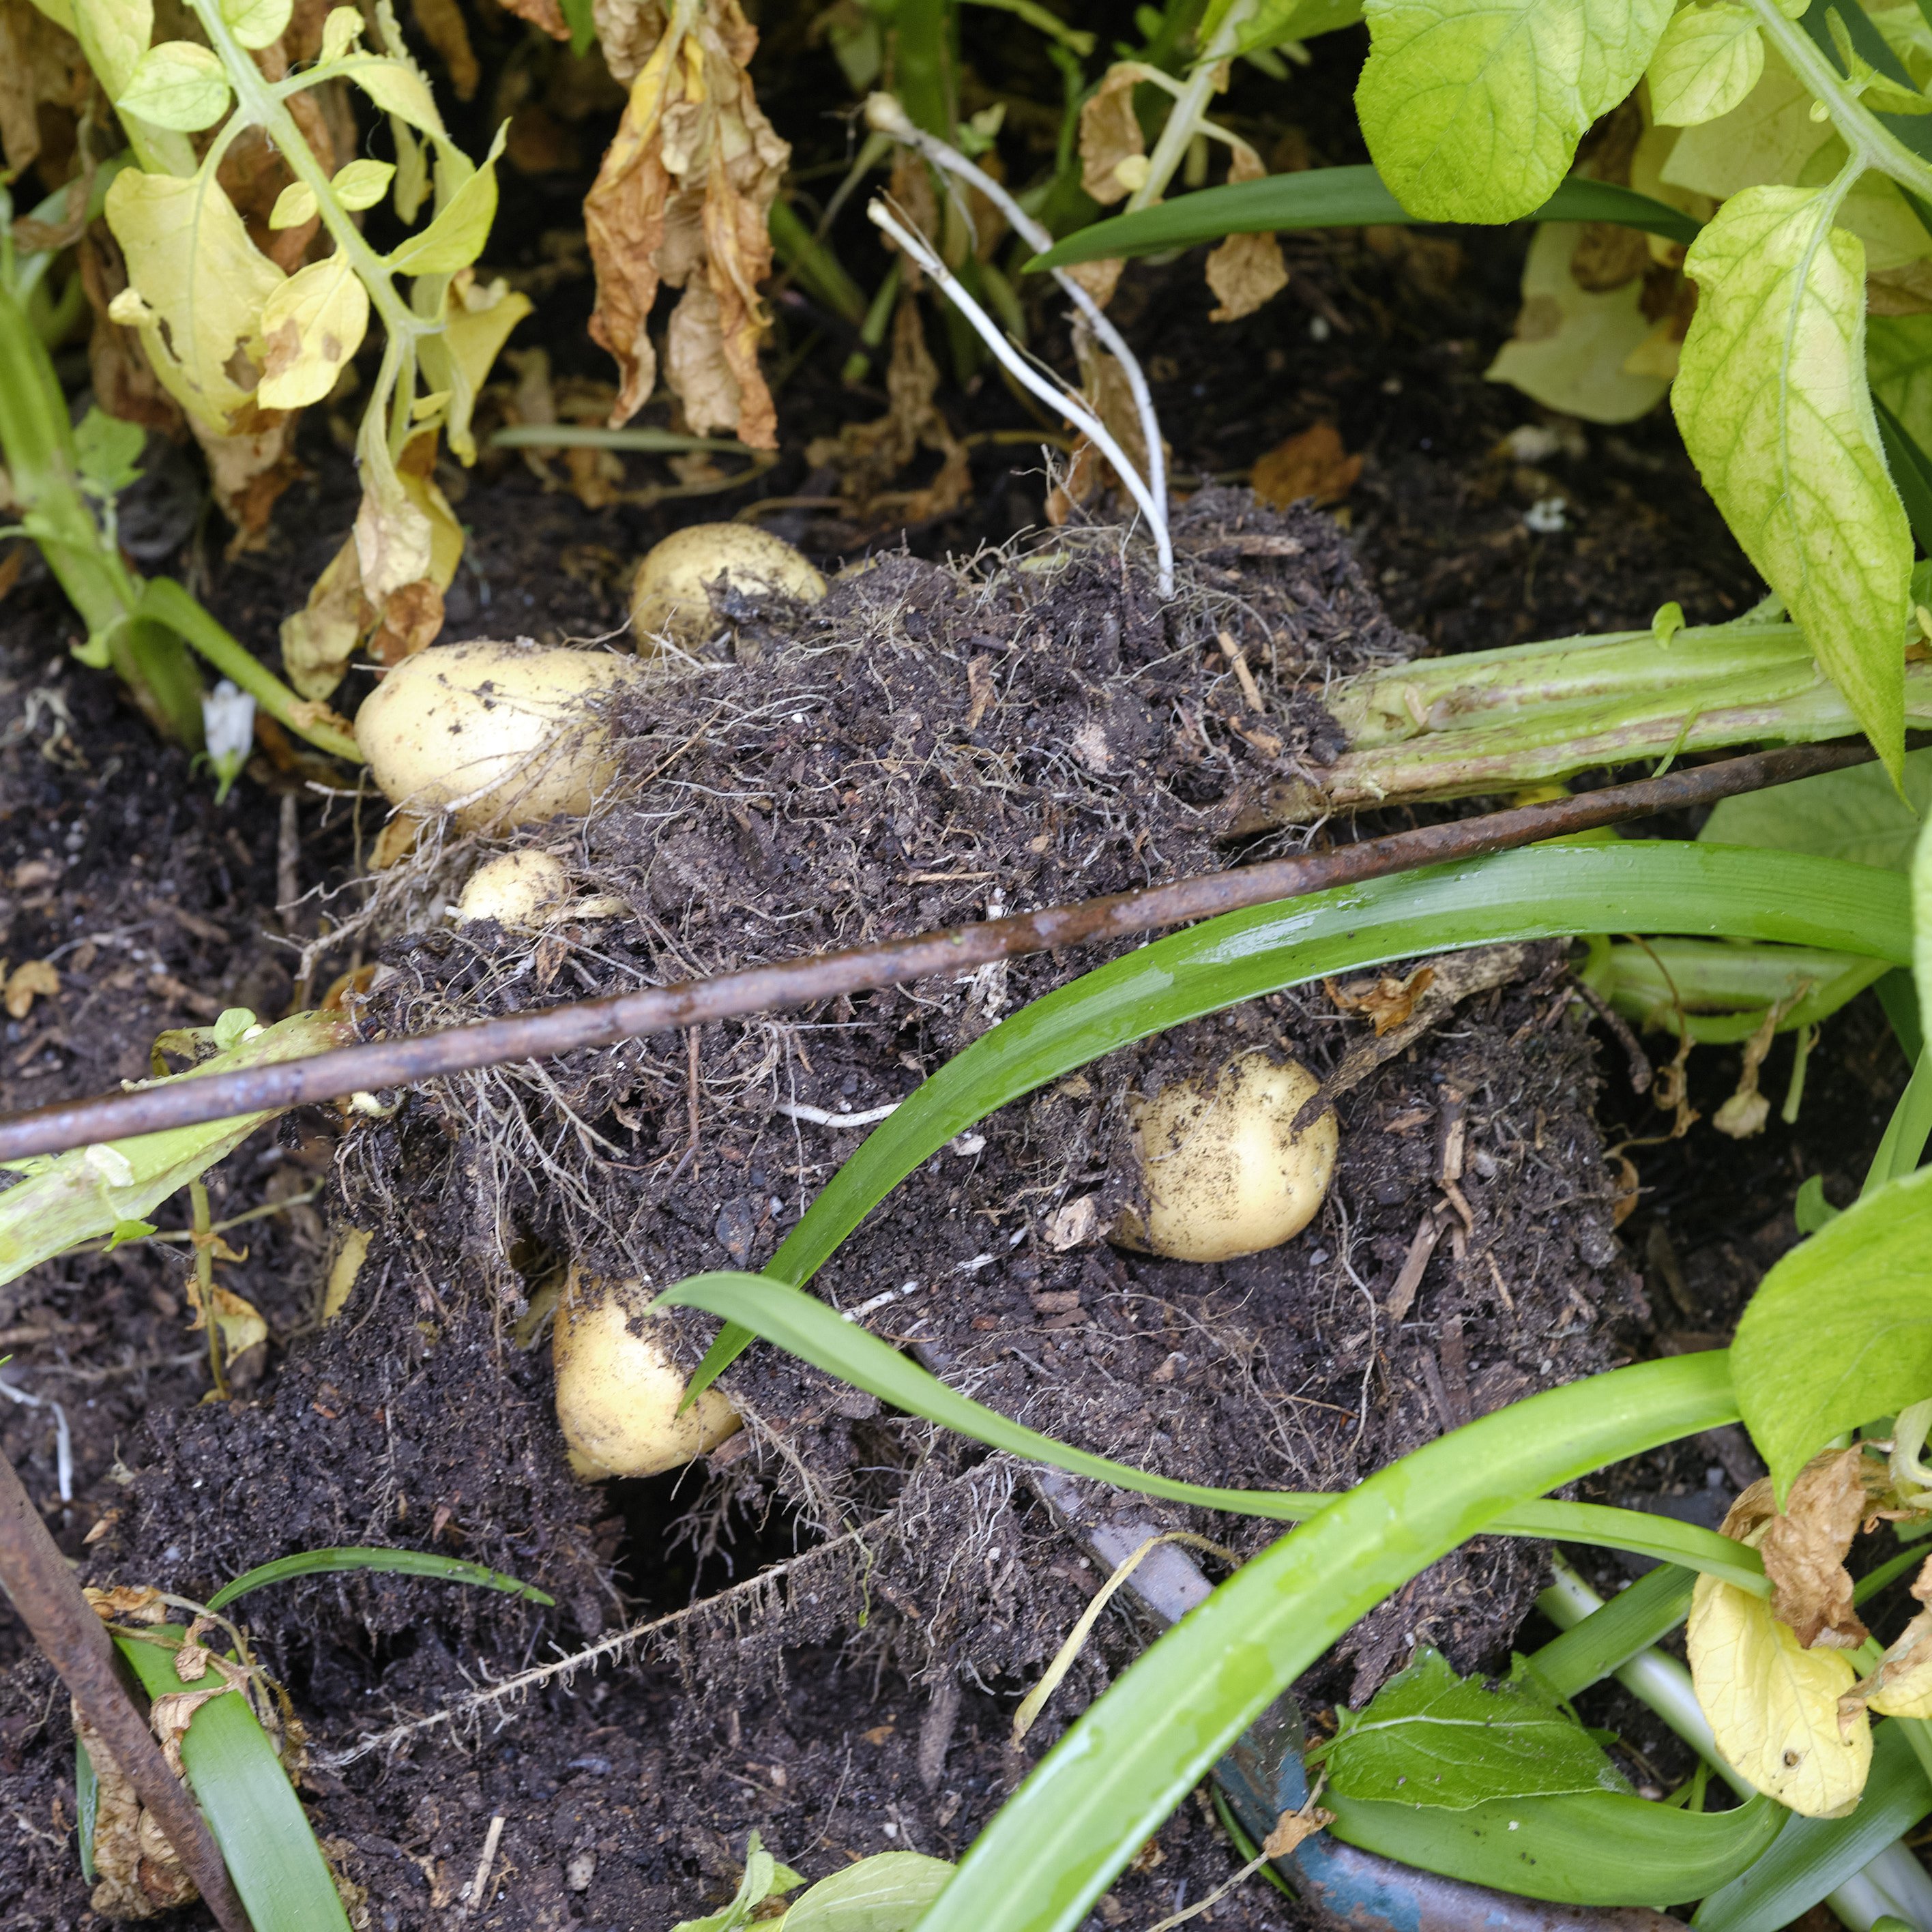 First root of Nichola potatoes